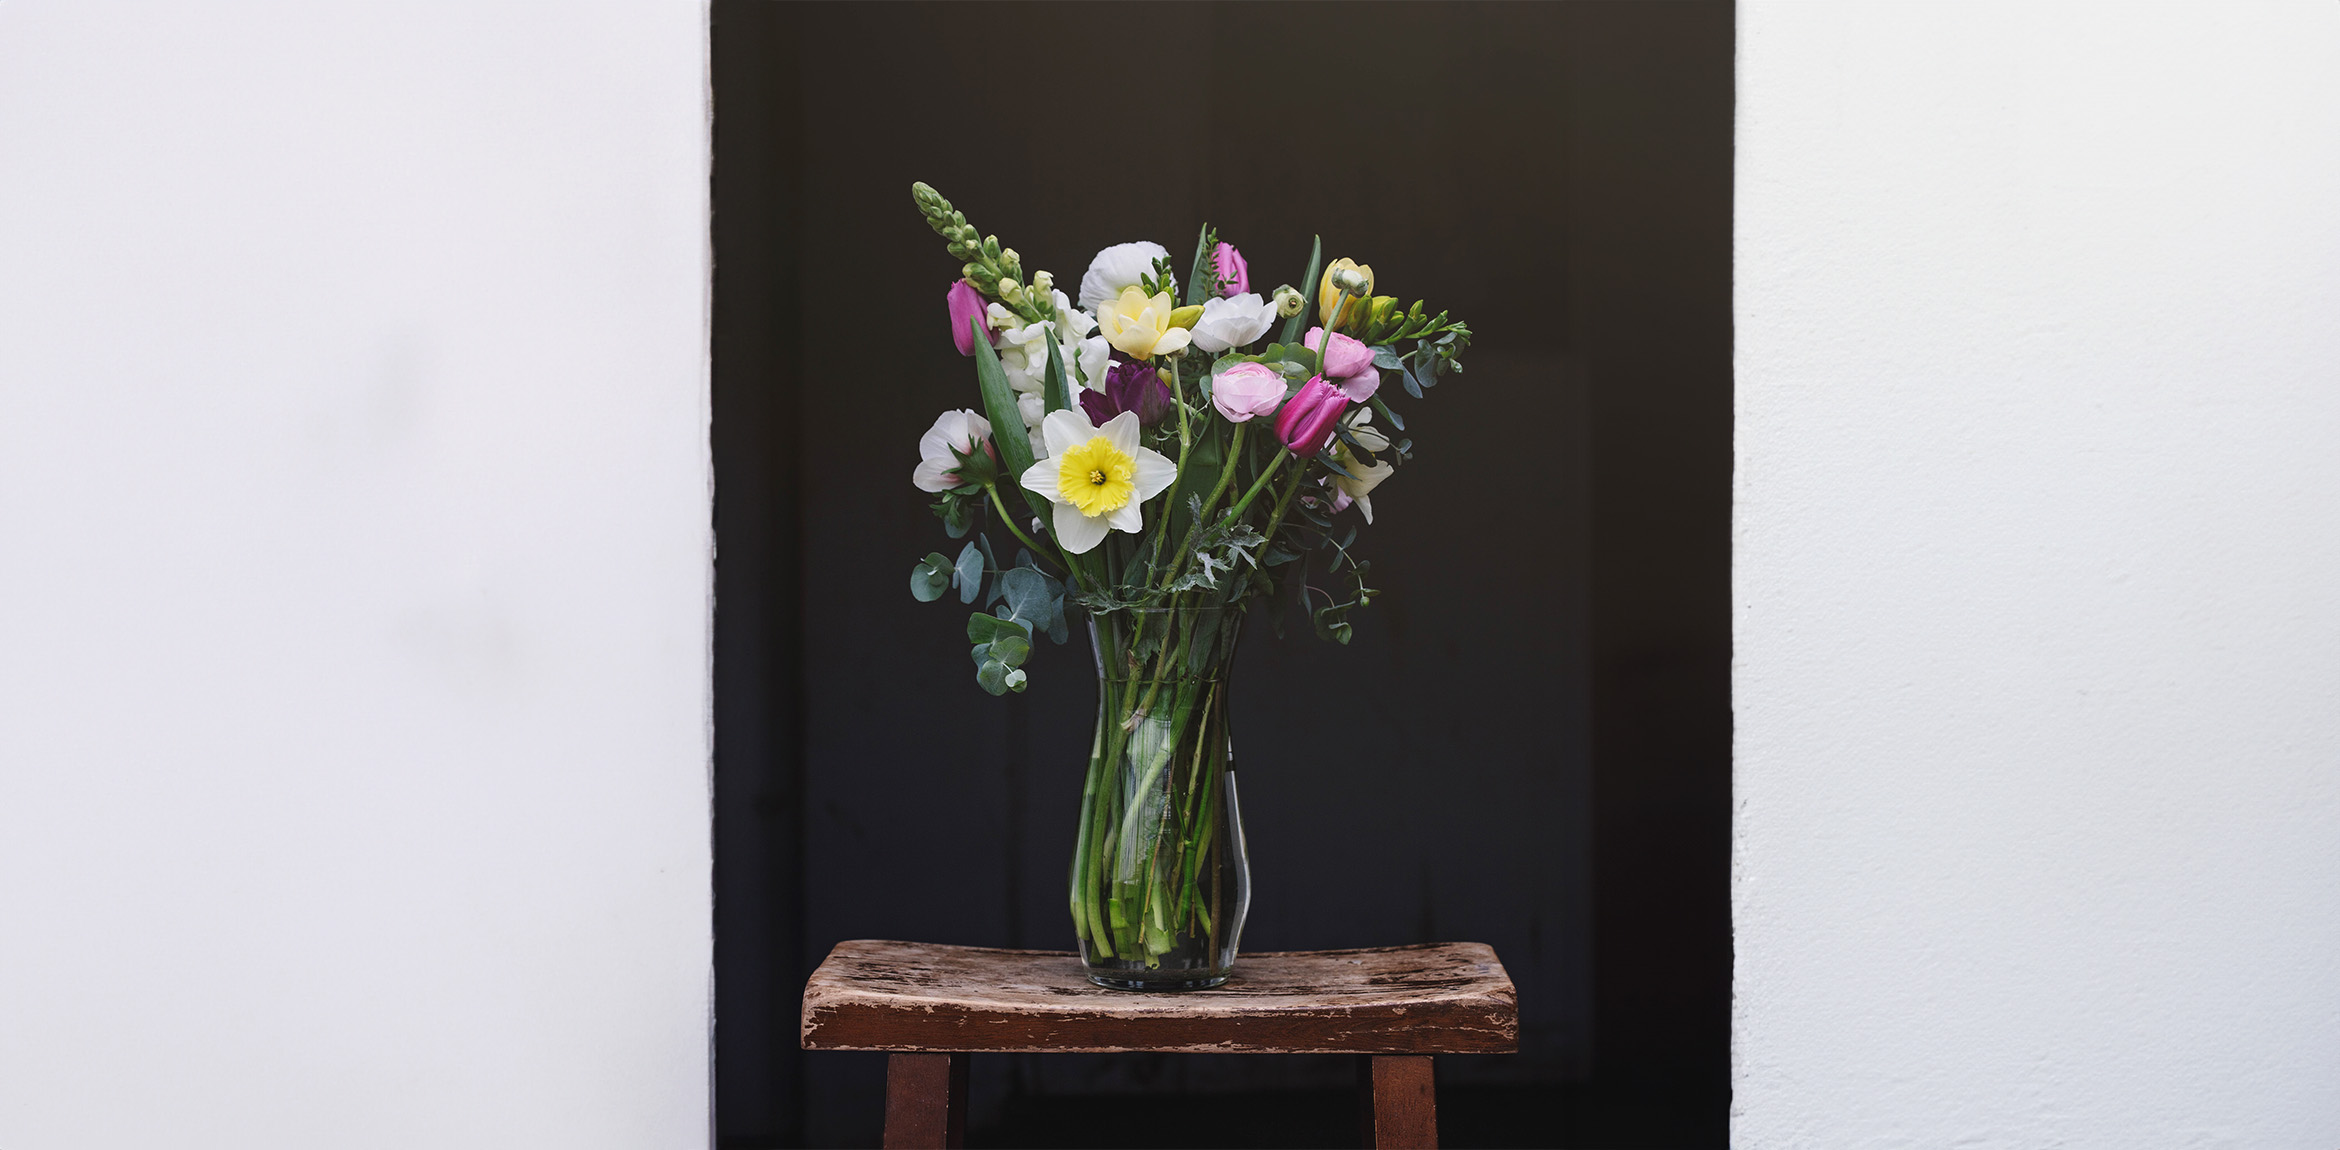 A vase of flowers in front of a dark background